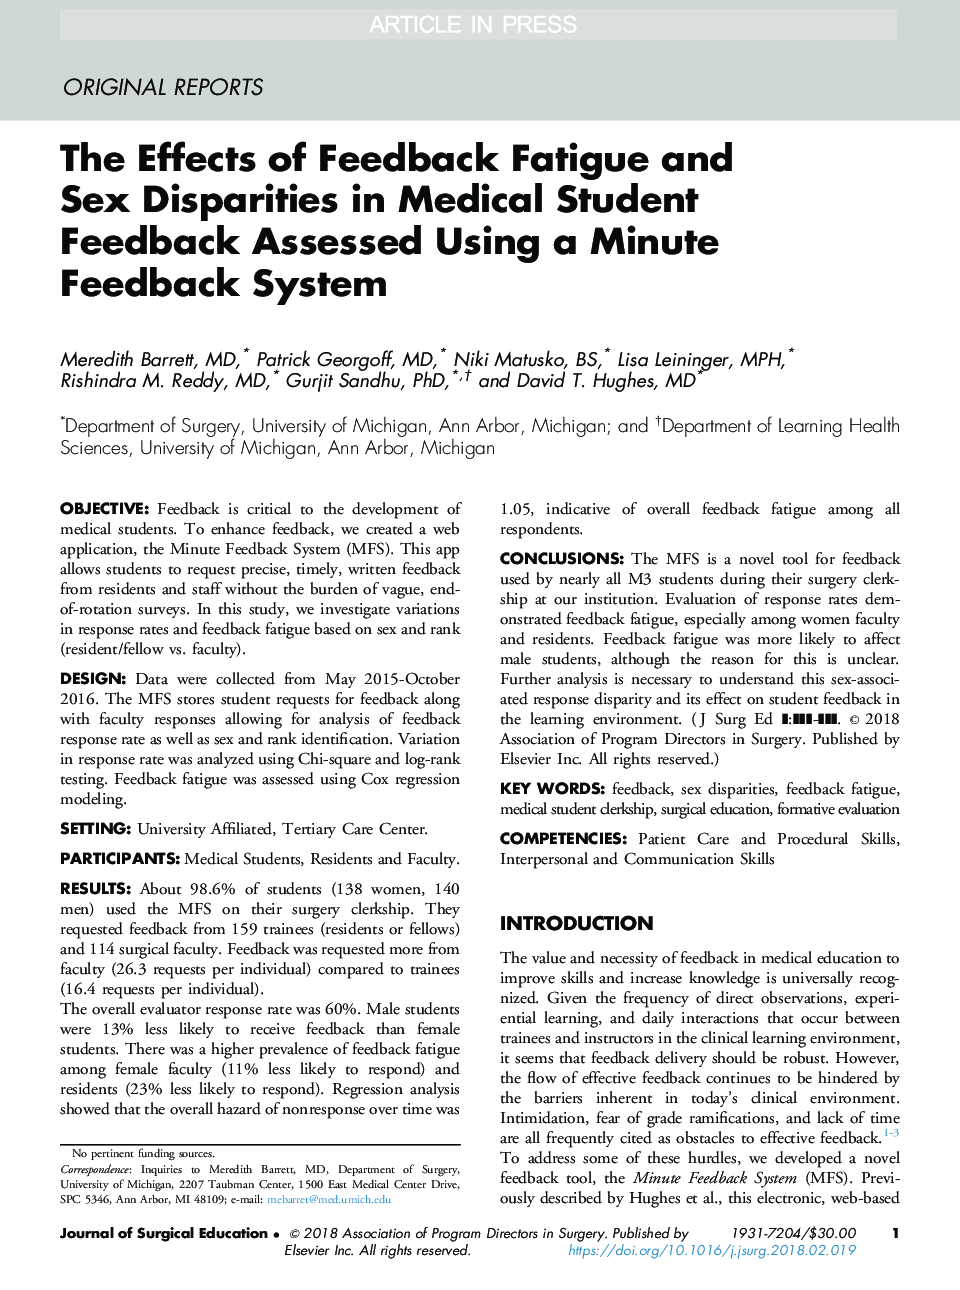 The Effects of Feedback Fatigue and Sex Disparities in Medical Student Feedback Assessed Using a Minute Feedback System